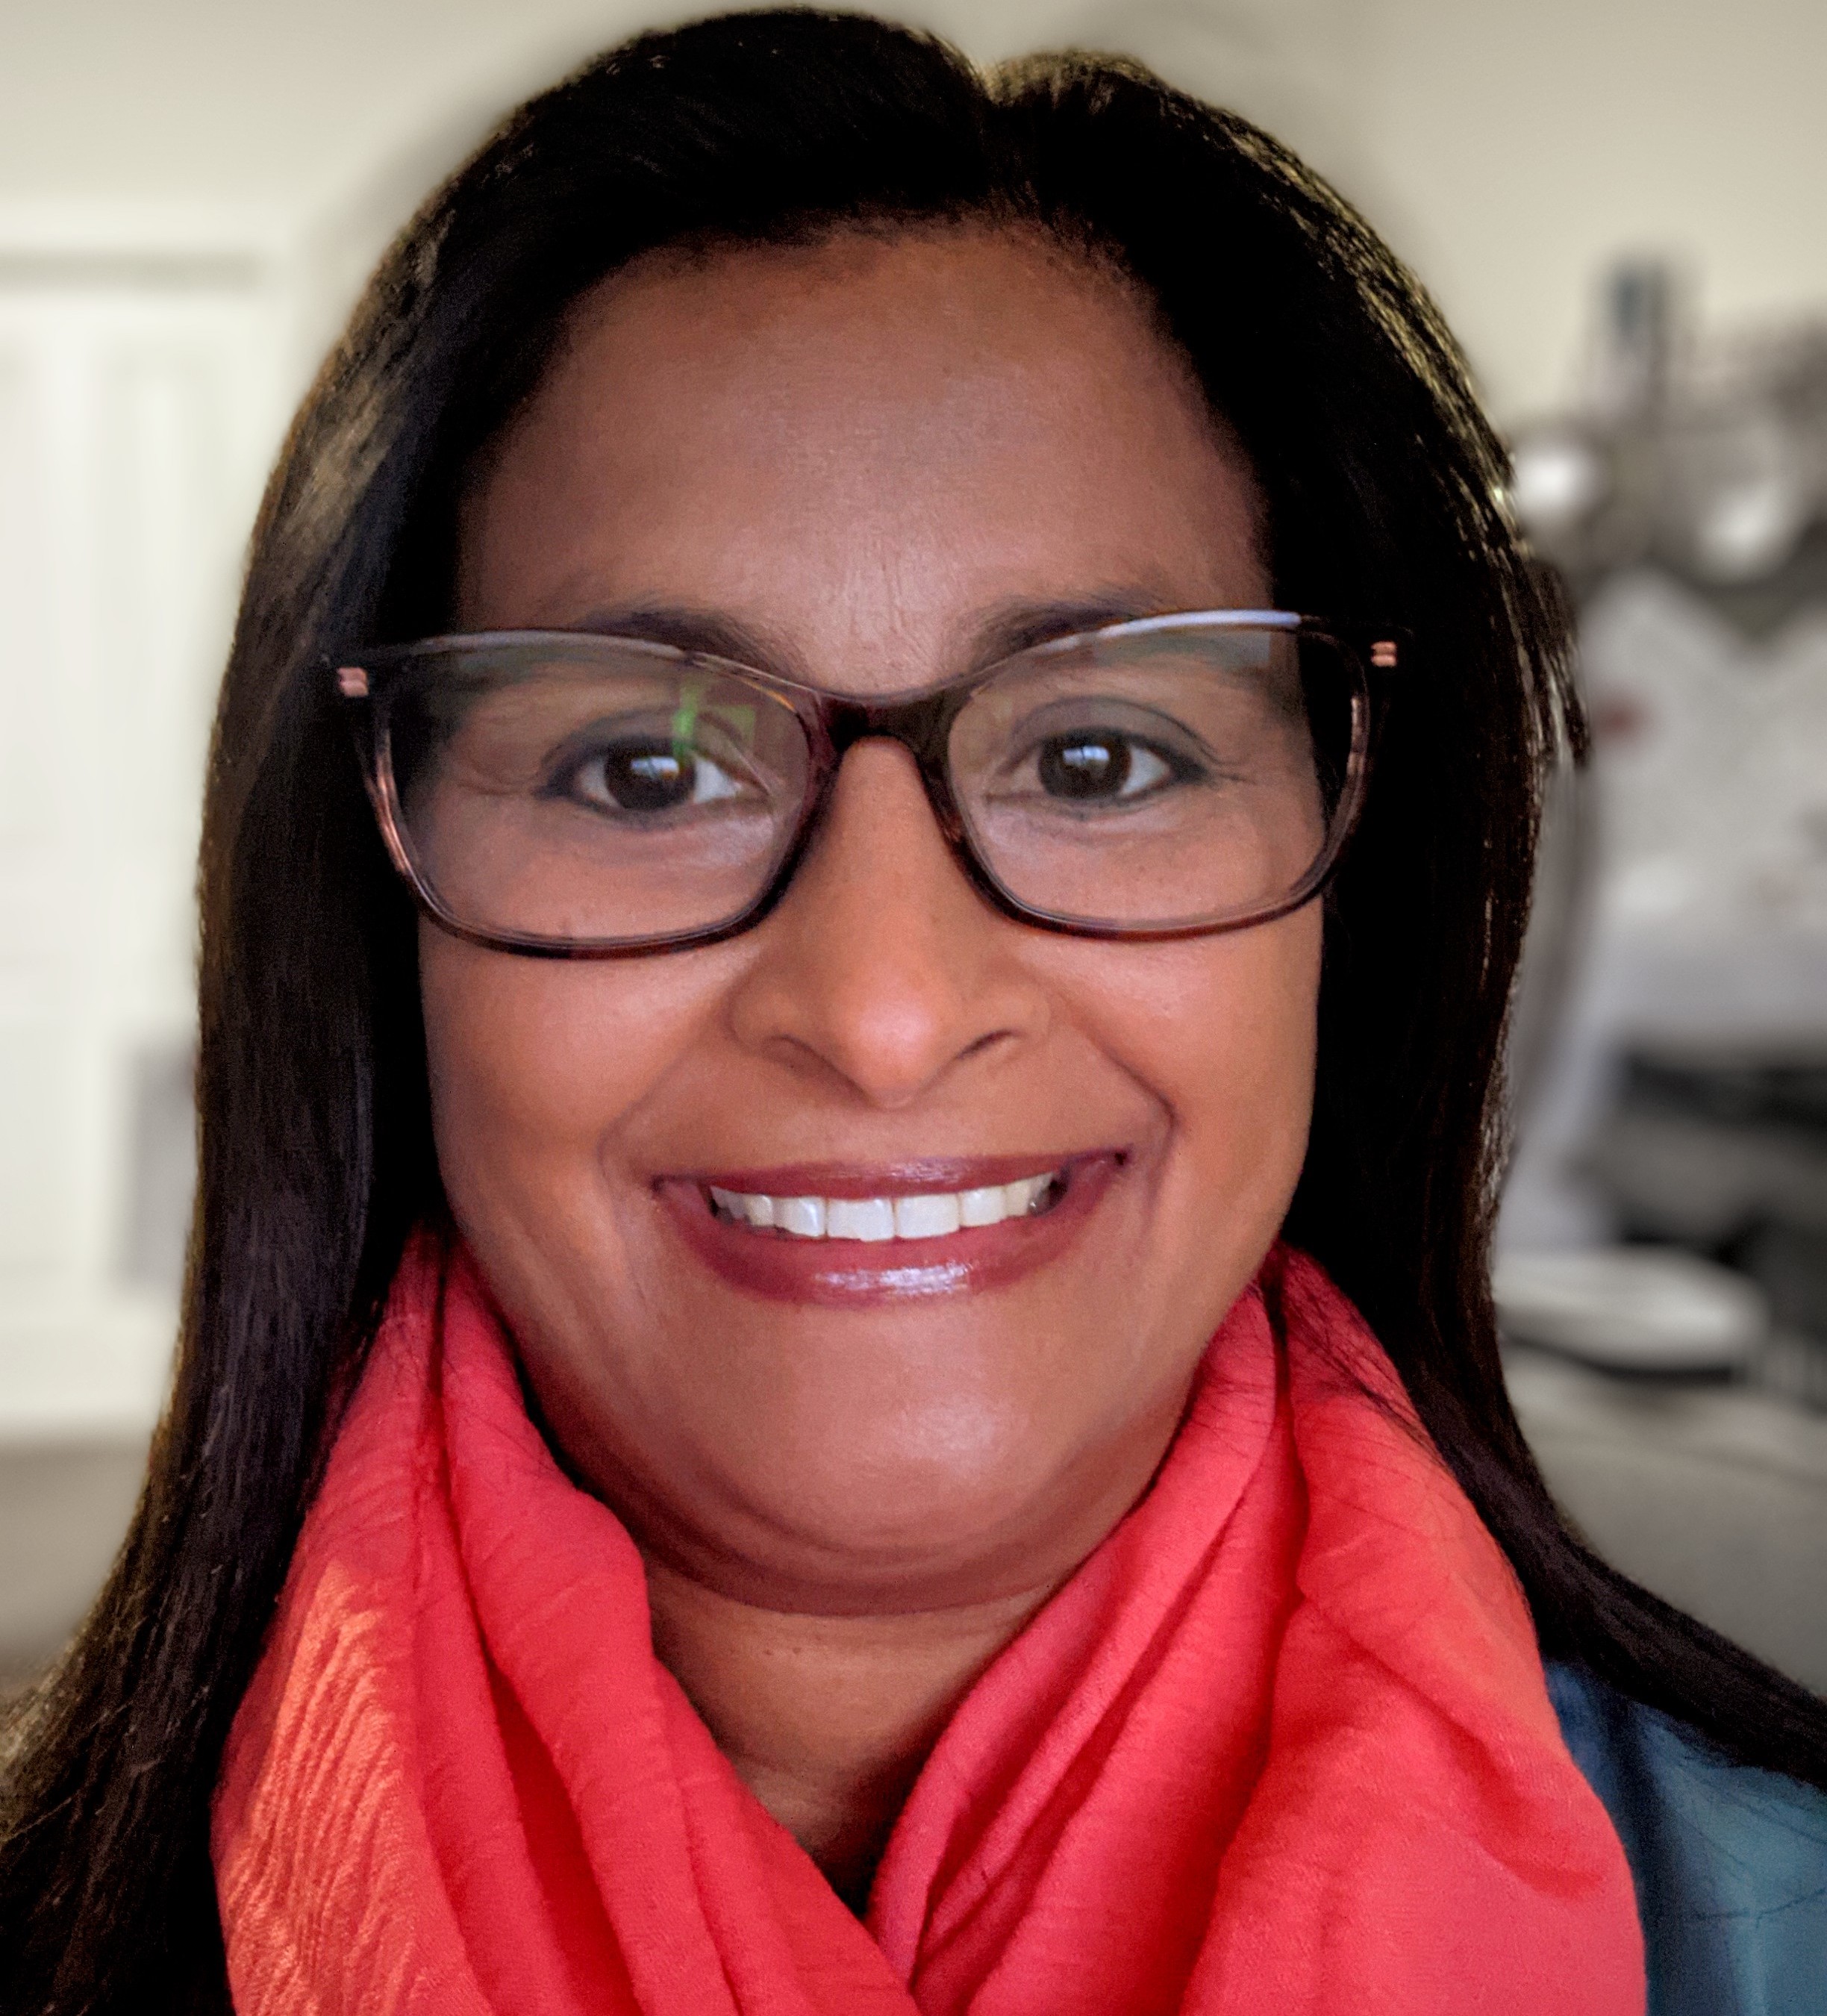 A photo of a woman smiling. She has brown skin, dark rimmed glasses and a red scarf.